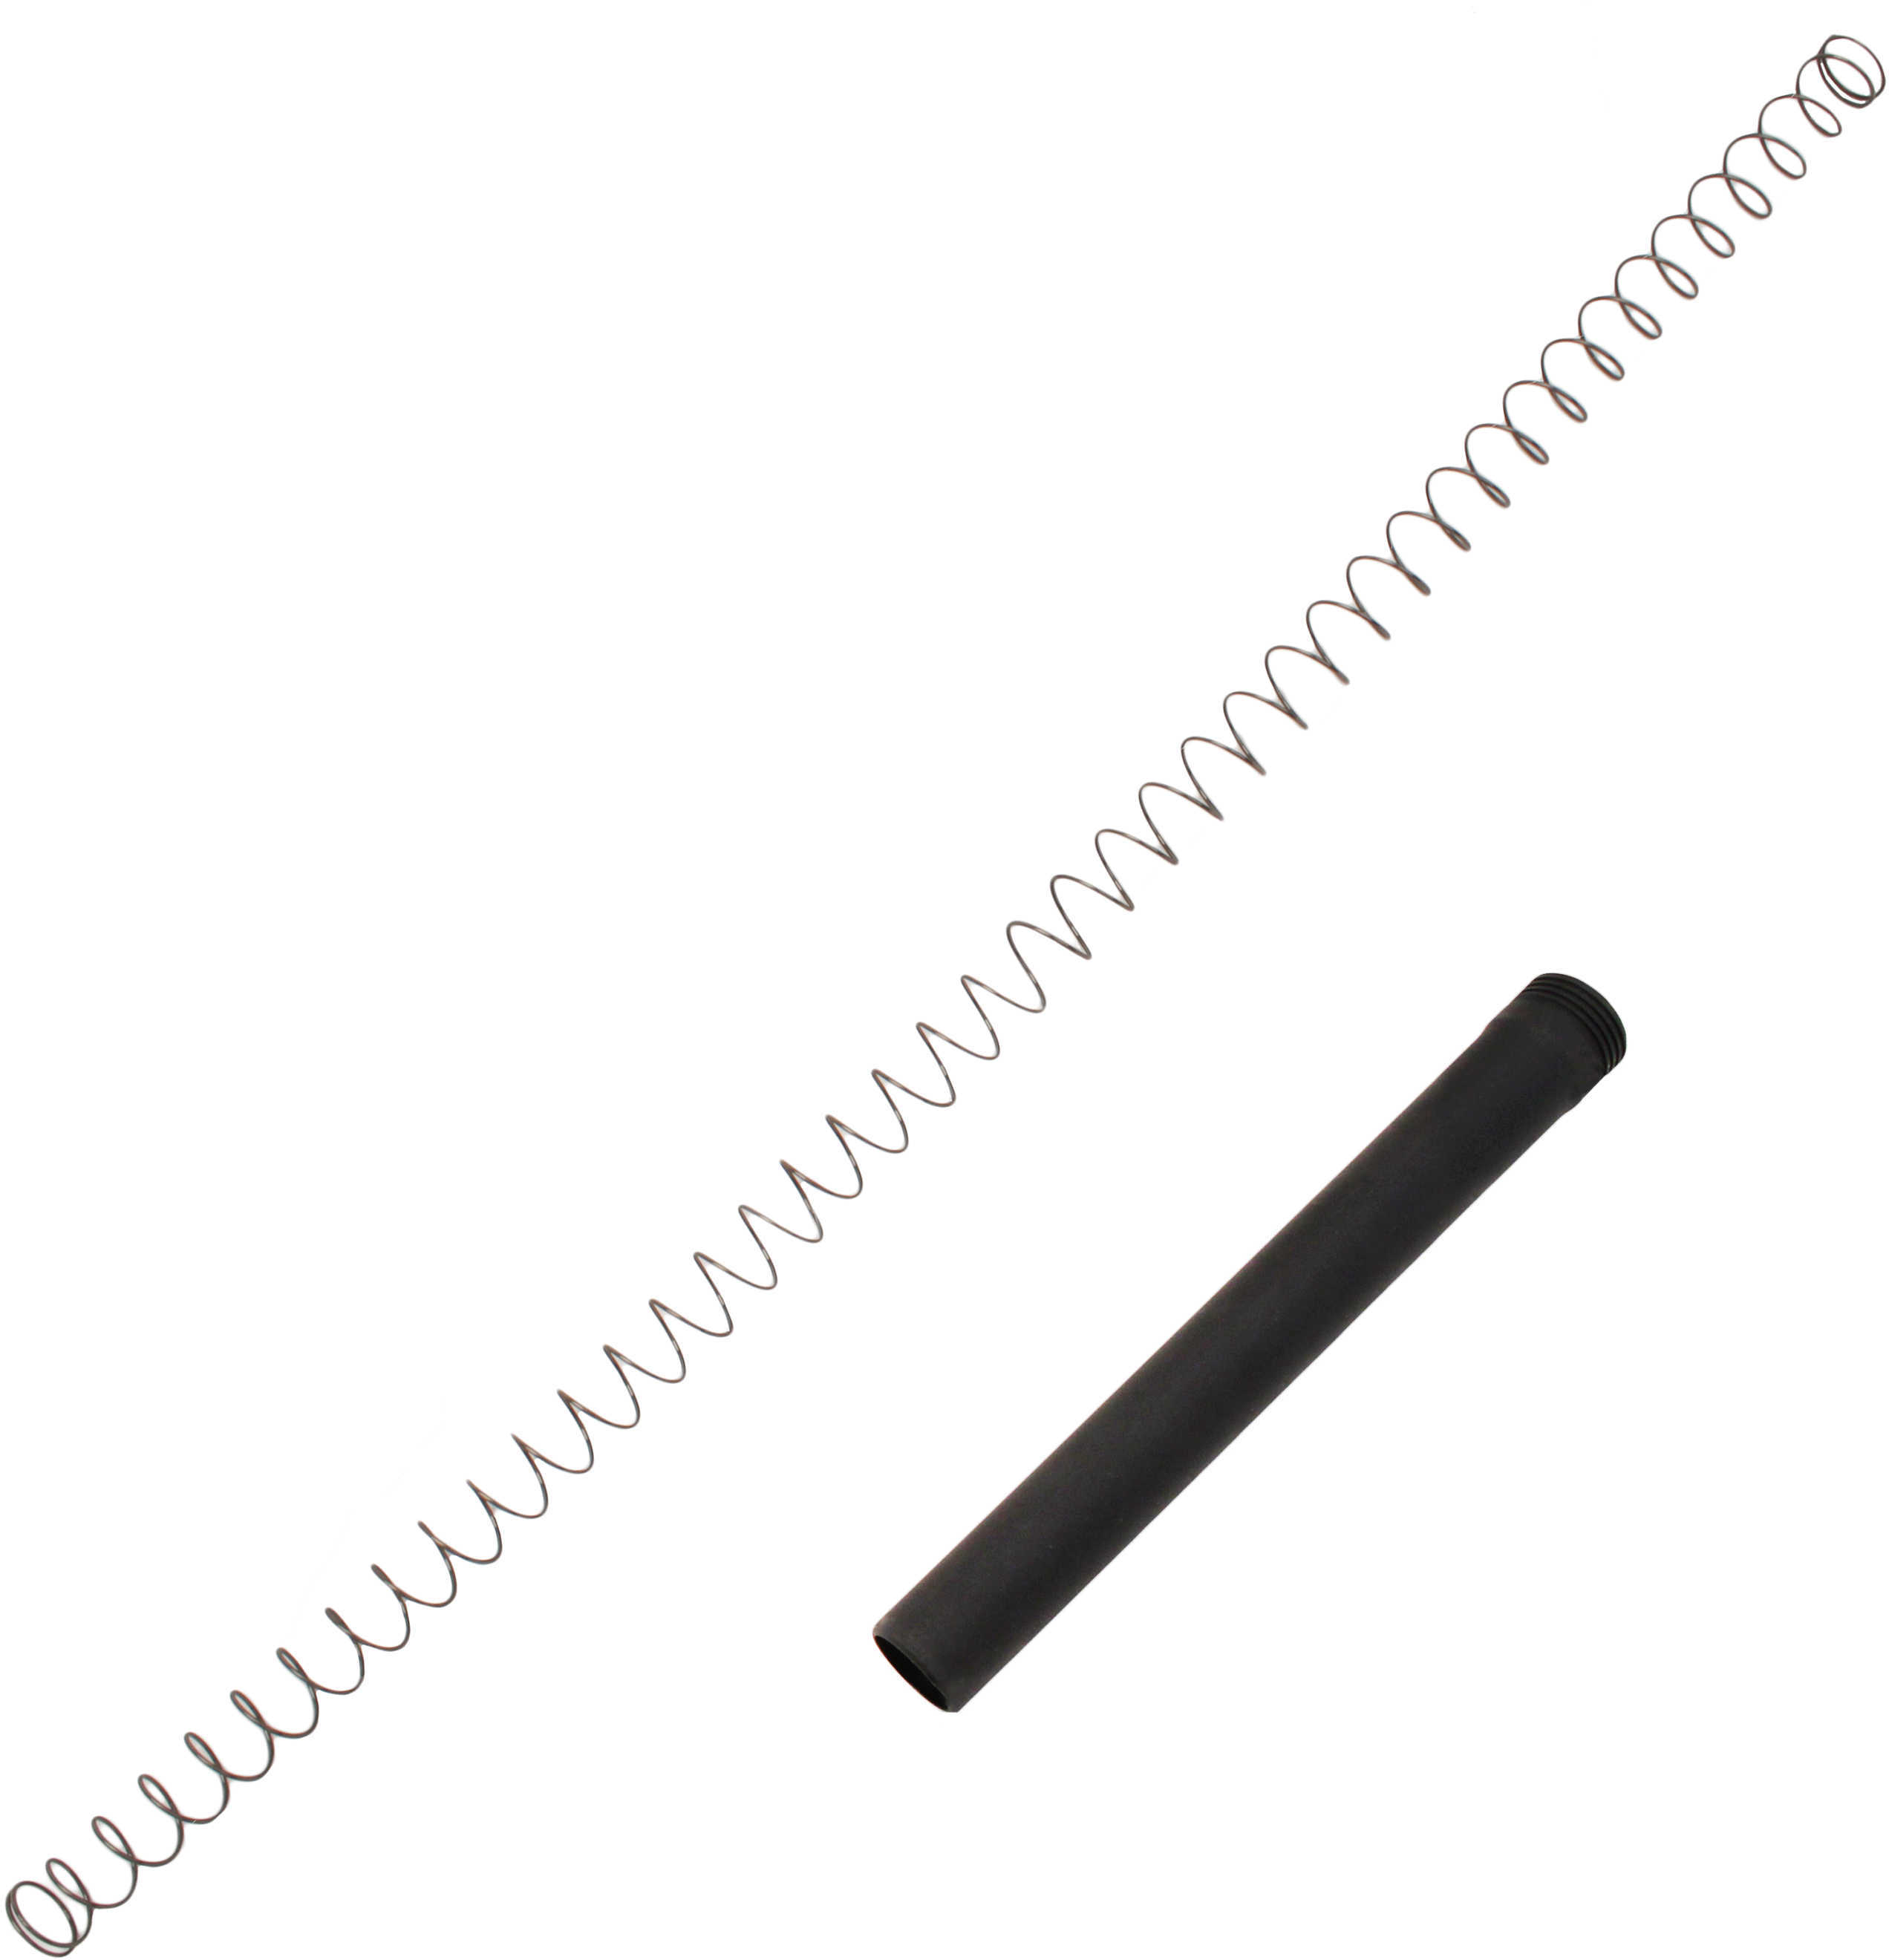 Pachmayr TacStar 7 Round Black Magazine Extension For Remington 870/1100/1187 Md: 1081169